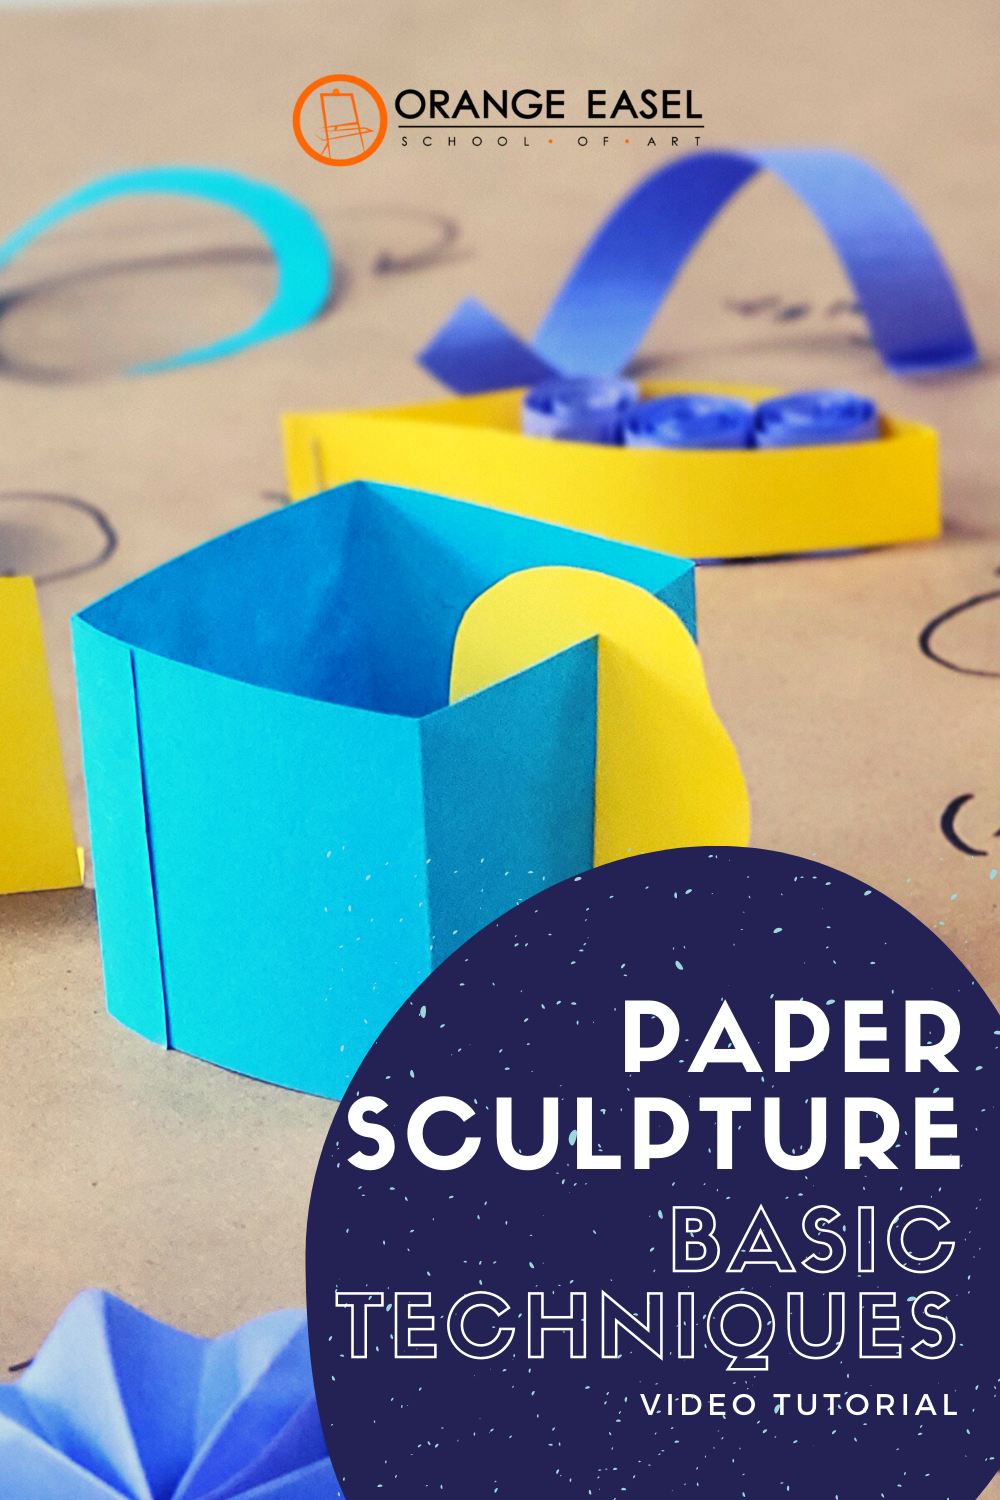 How to Make a Paper Sculpture